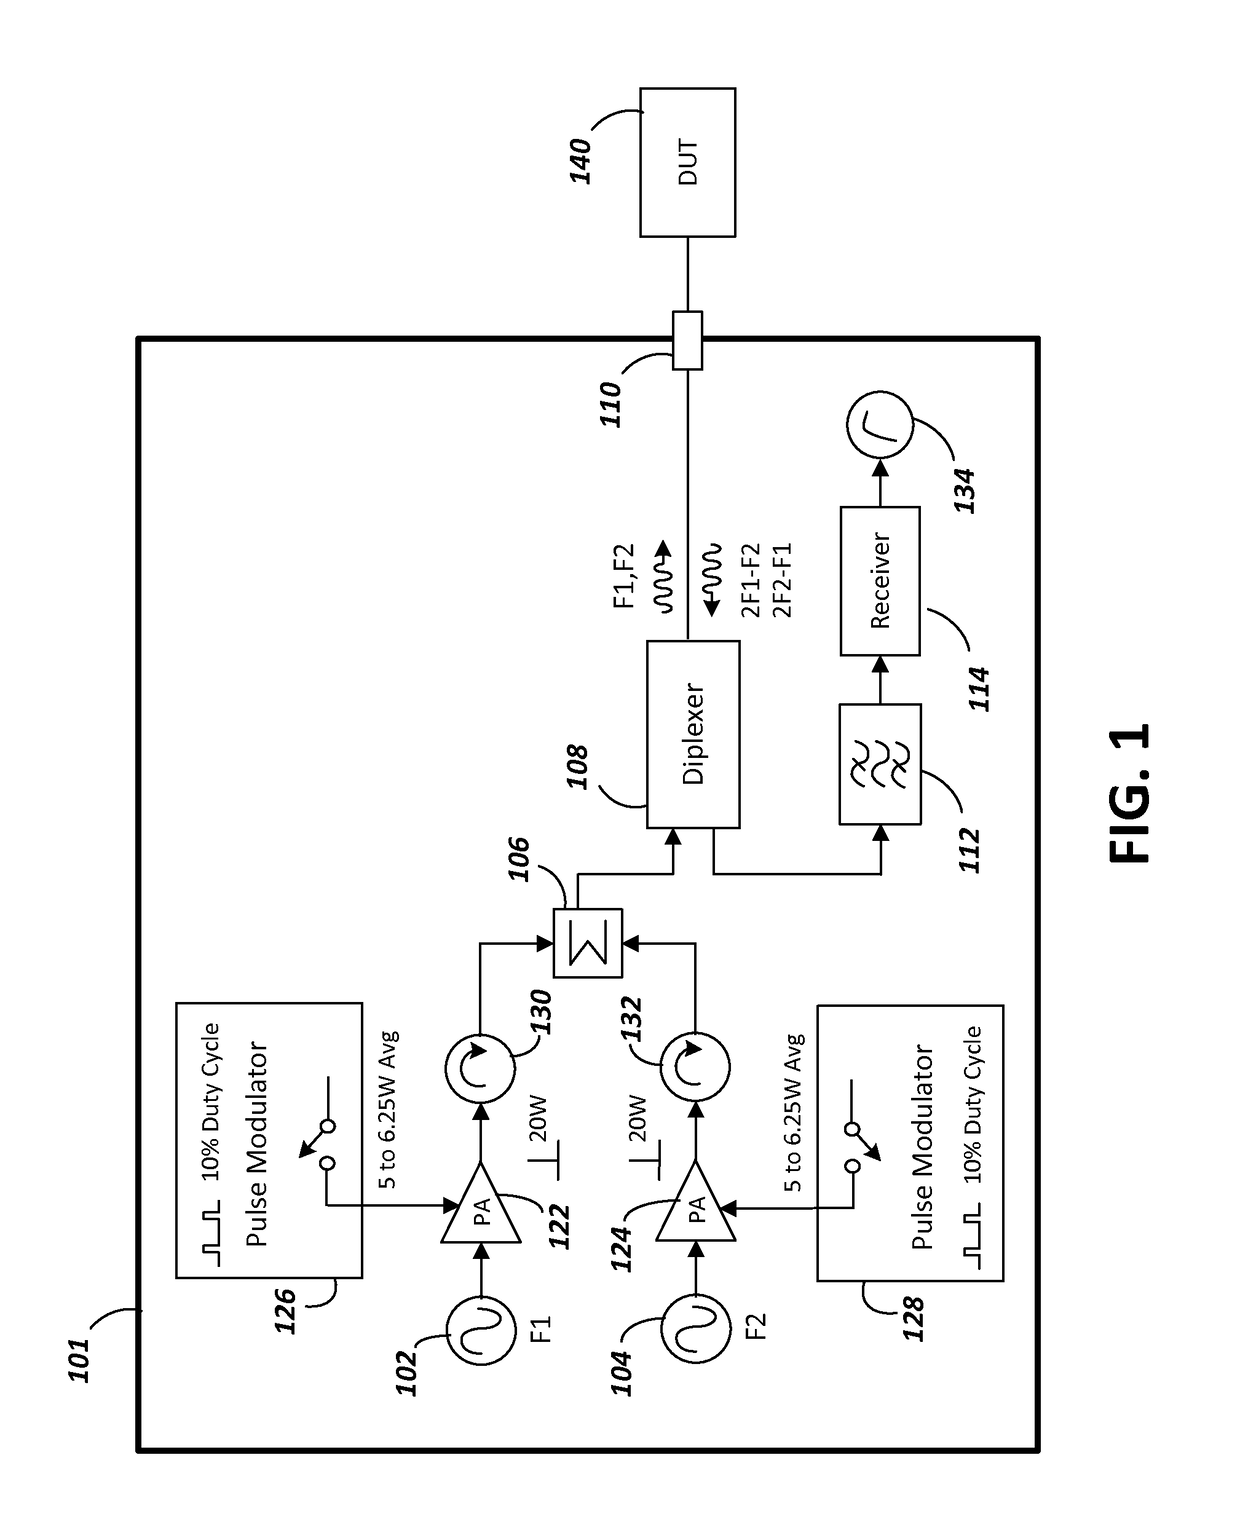 Pulse modulated passive intermodulation (PIM) measuring instrument with reduced noise floor